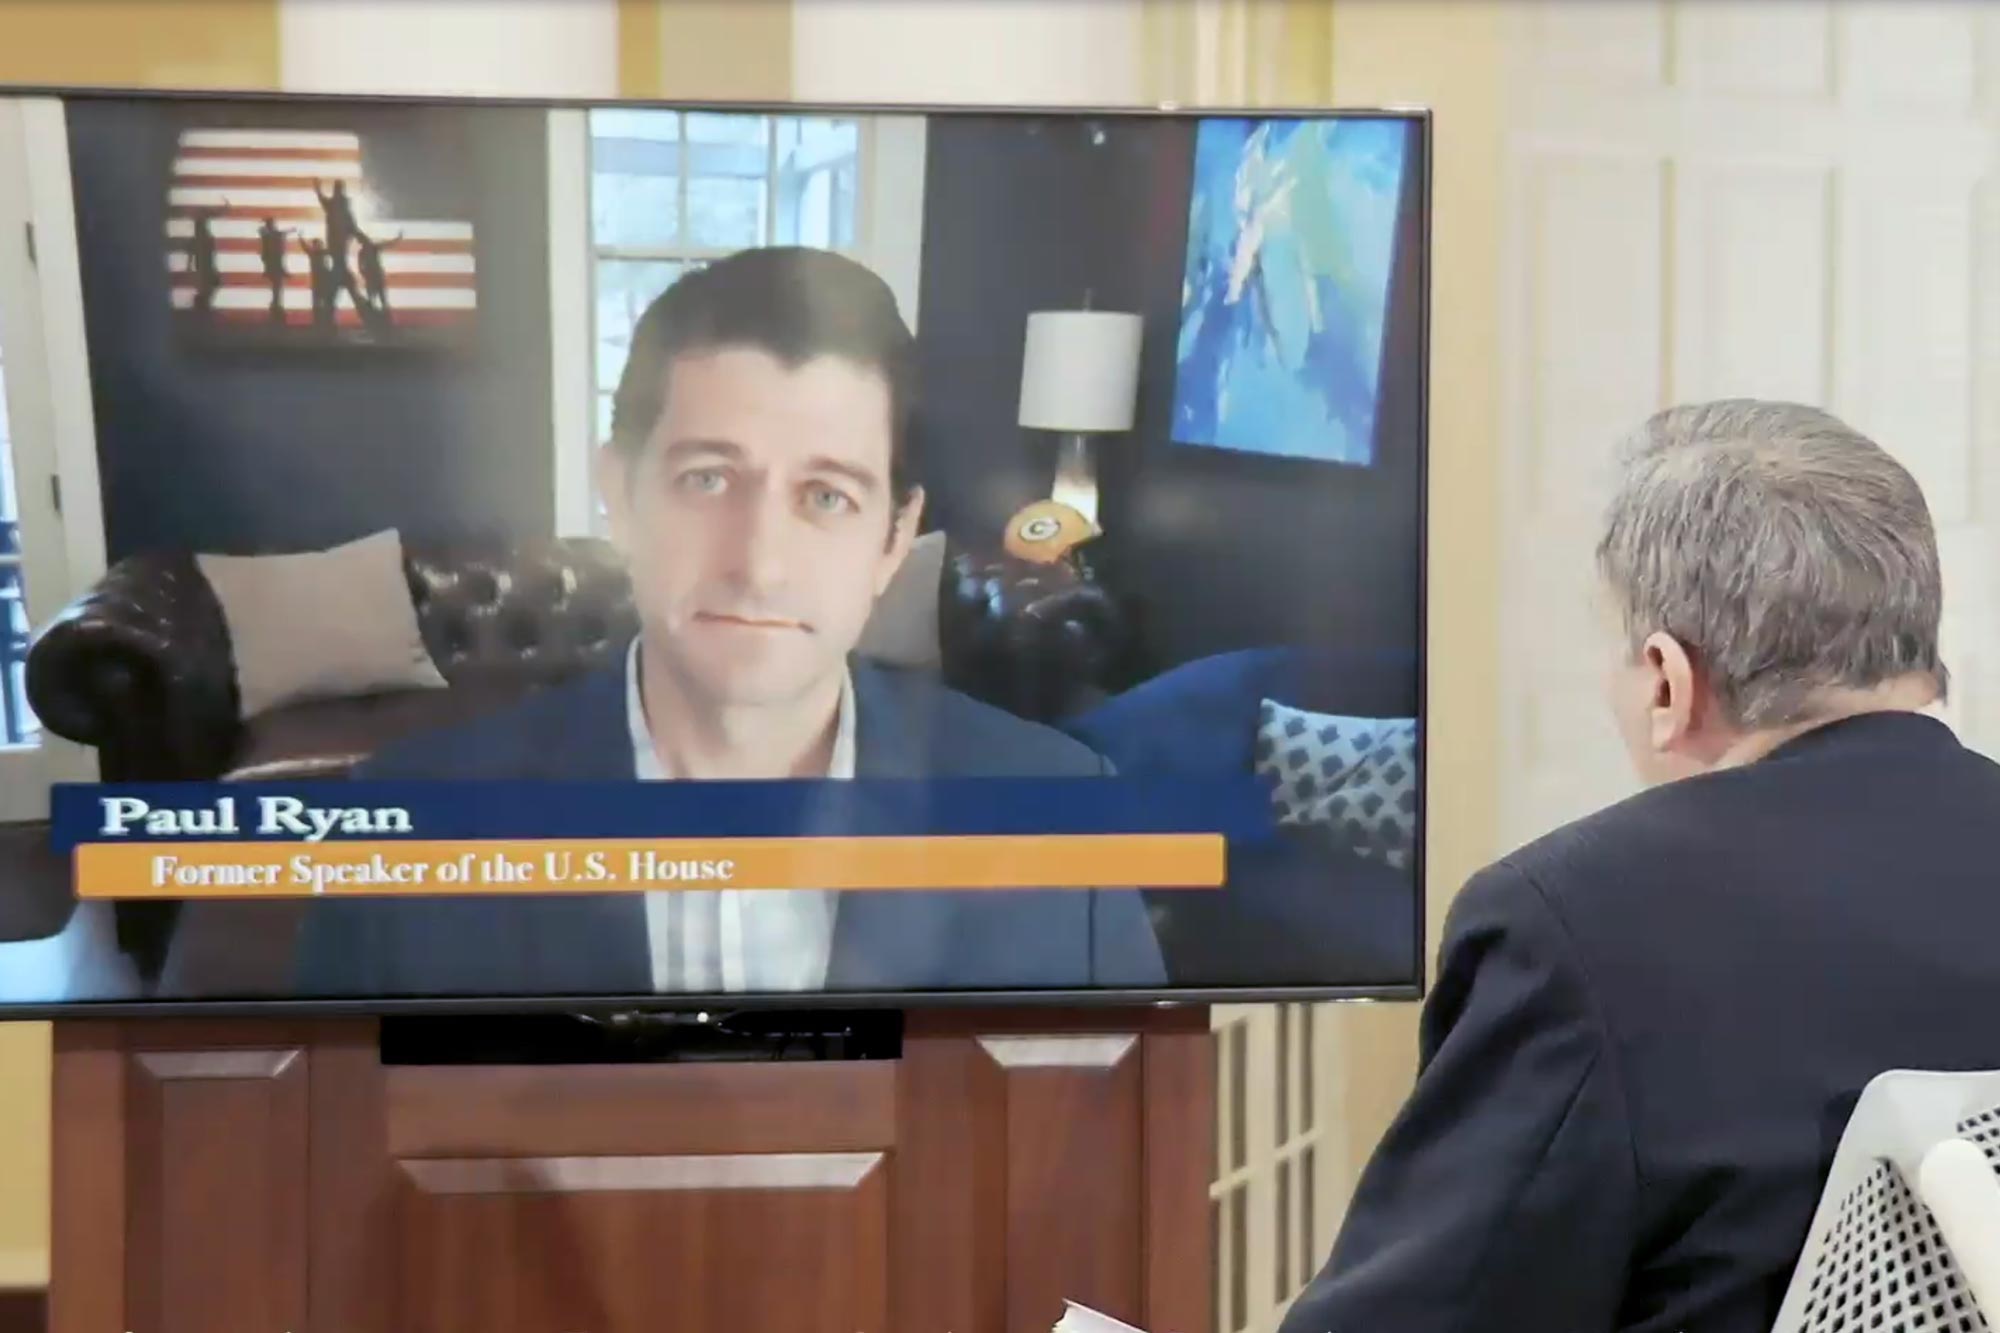 Paul Ryan on a tv screen speaking with Larry Sabato